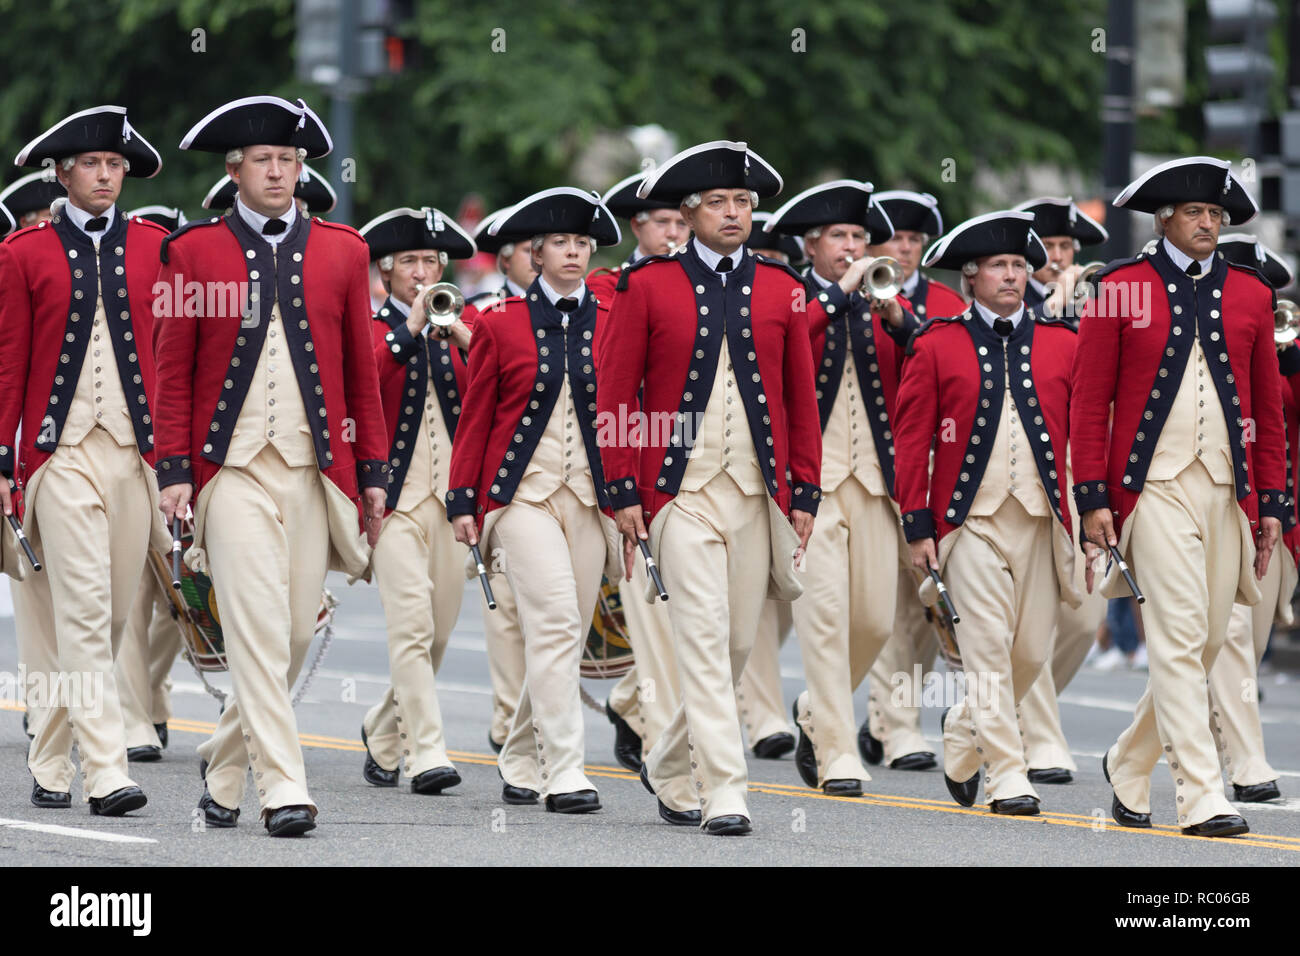 Washington, D.C., USA - May 28, 2018: The National Memorial Day Parade, Members of The U.S. Army Old Guard Fife and Drum Corps, marching down Constitu Stock Photo